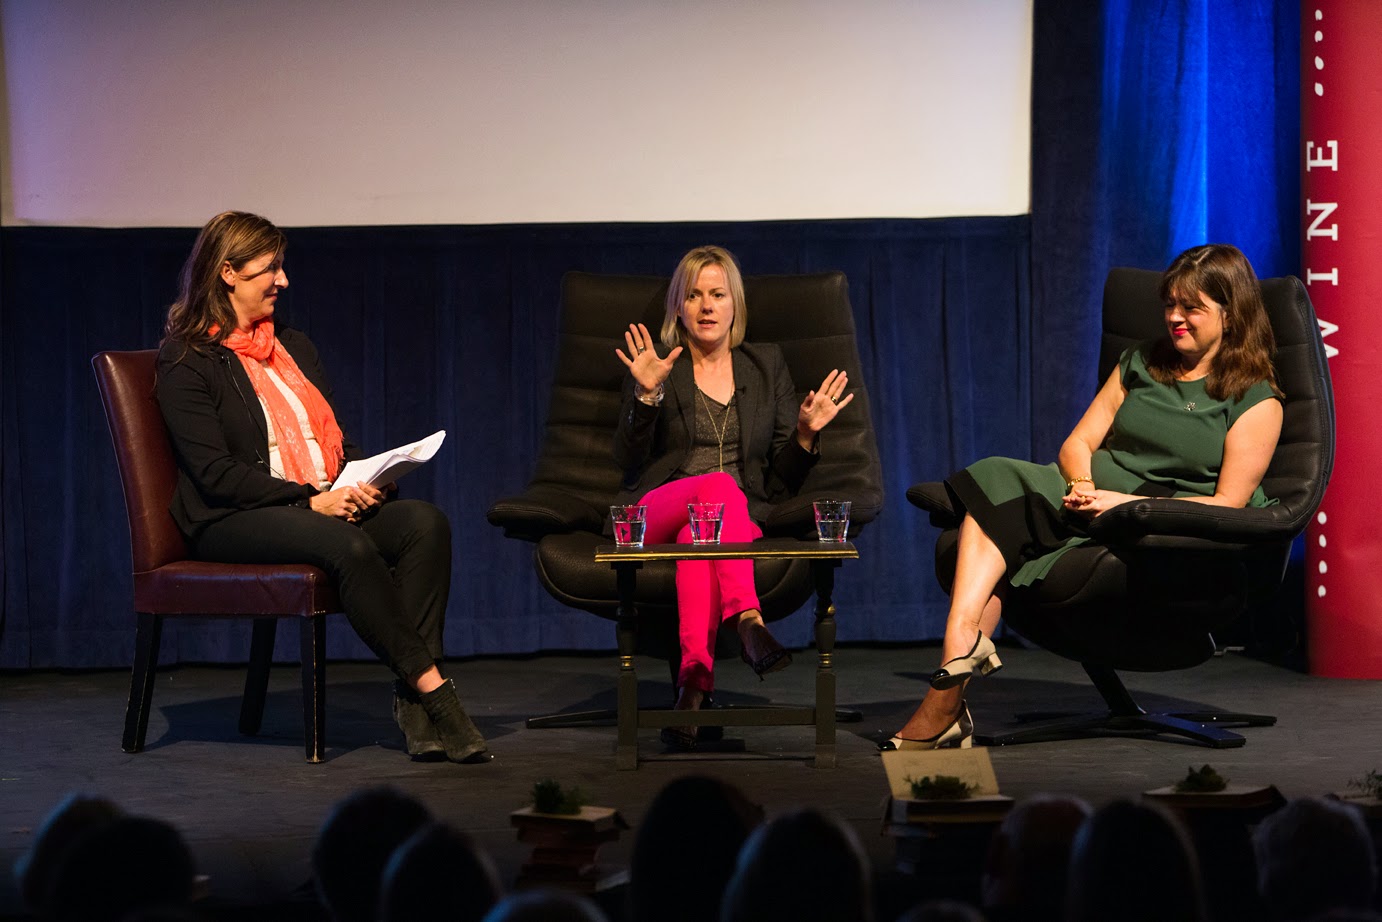 Lucy Cavendish interviews Jojo Moyes and Daisy Goodwin at the Henley Literary Festival